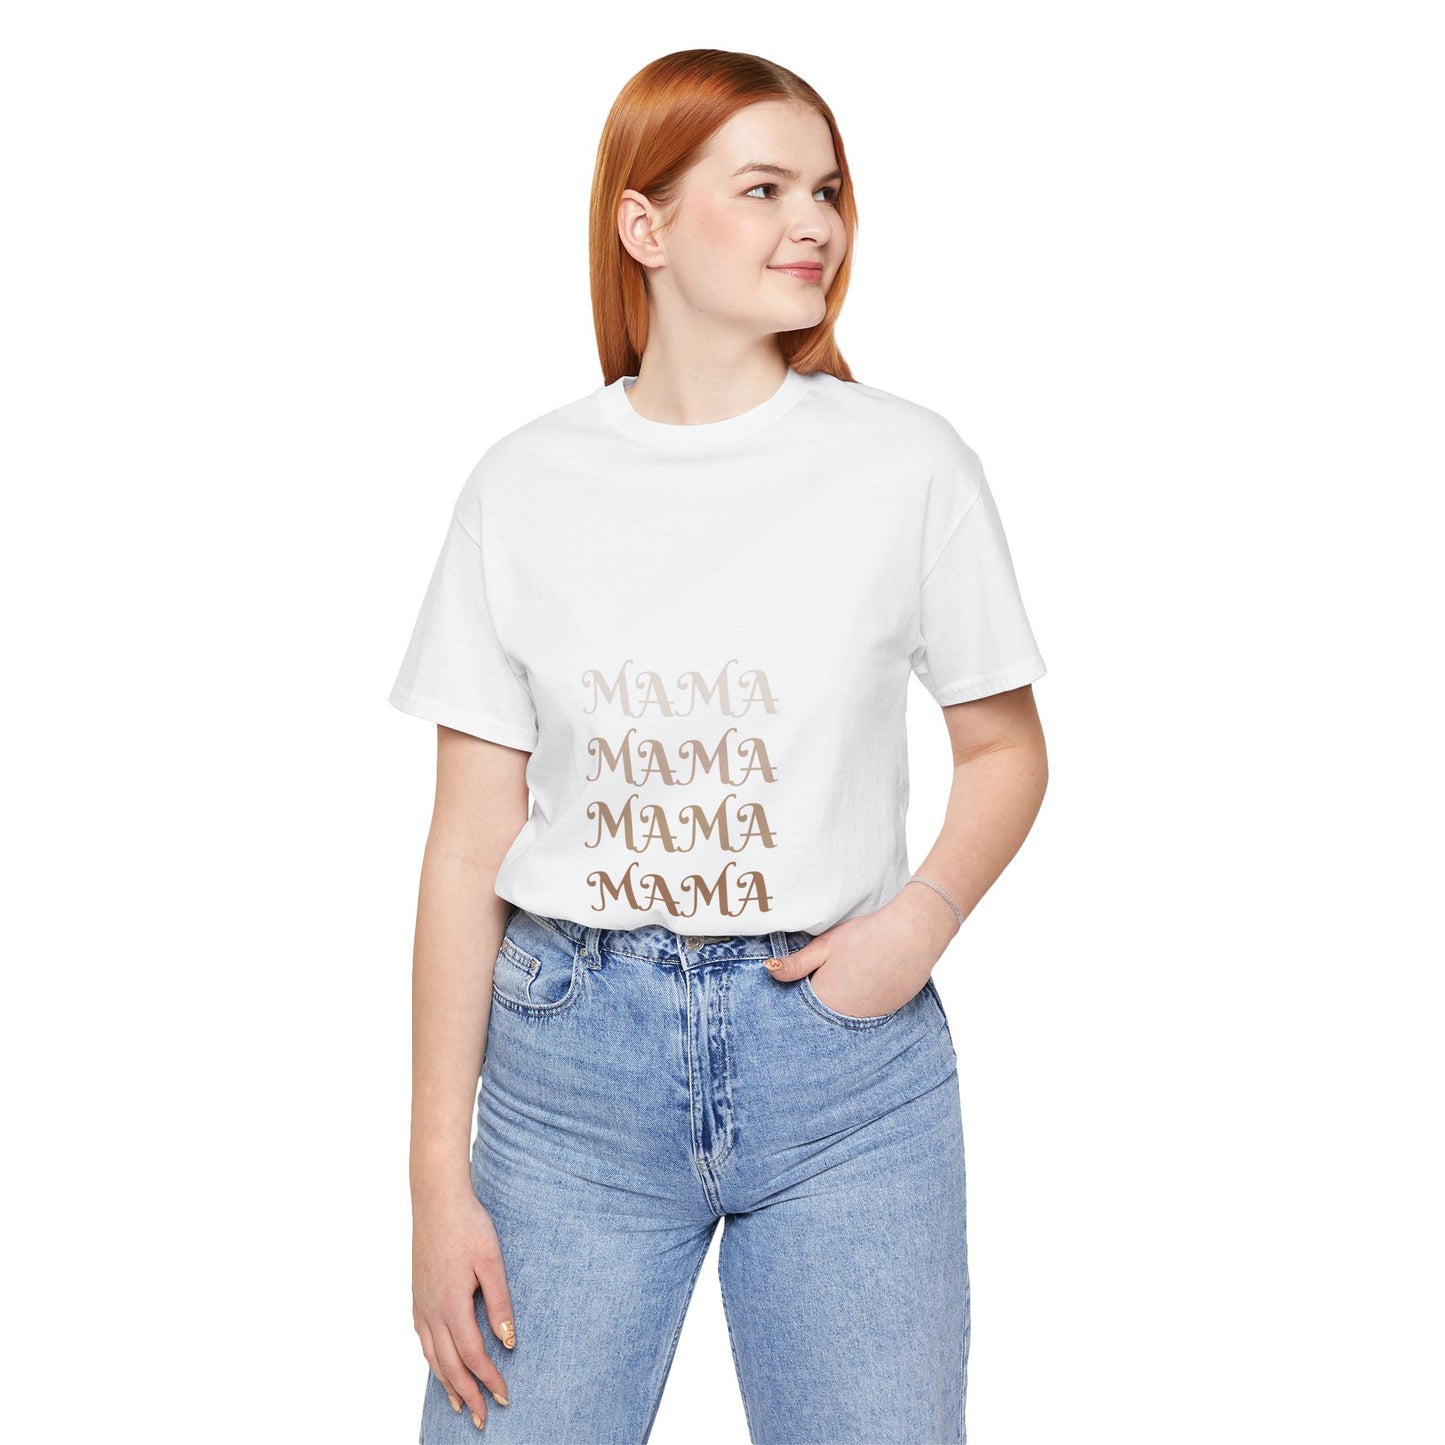 Mother's Day "MAMA" Short Sleeve Tee